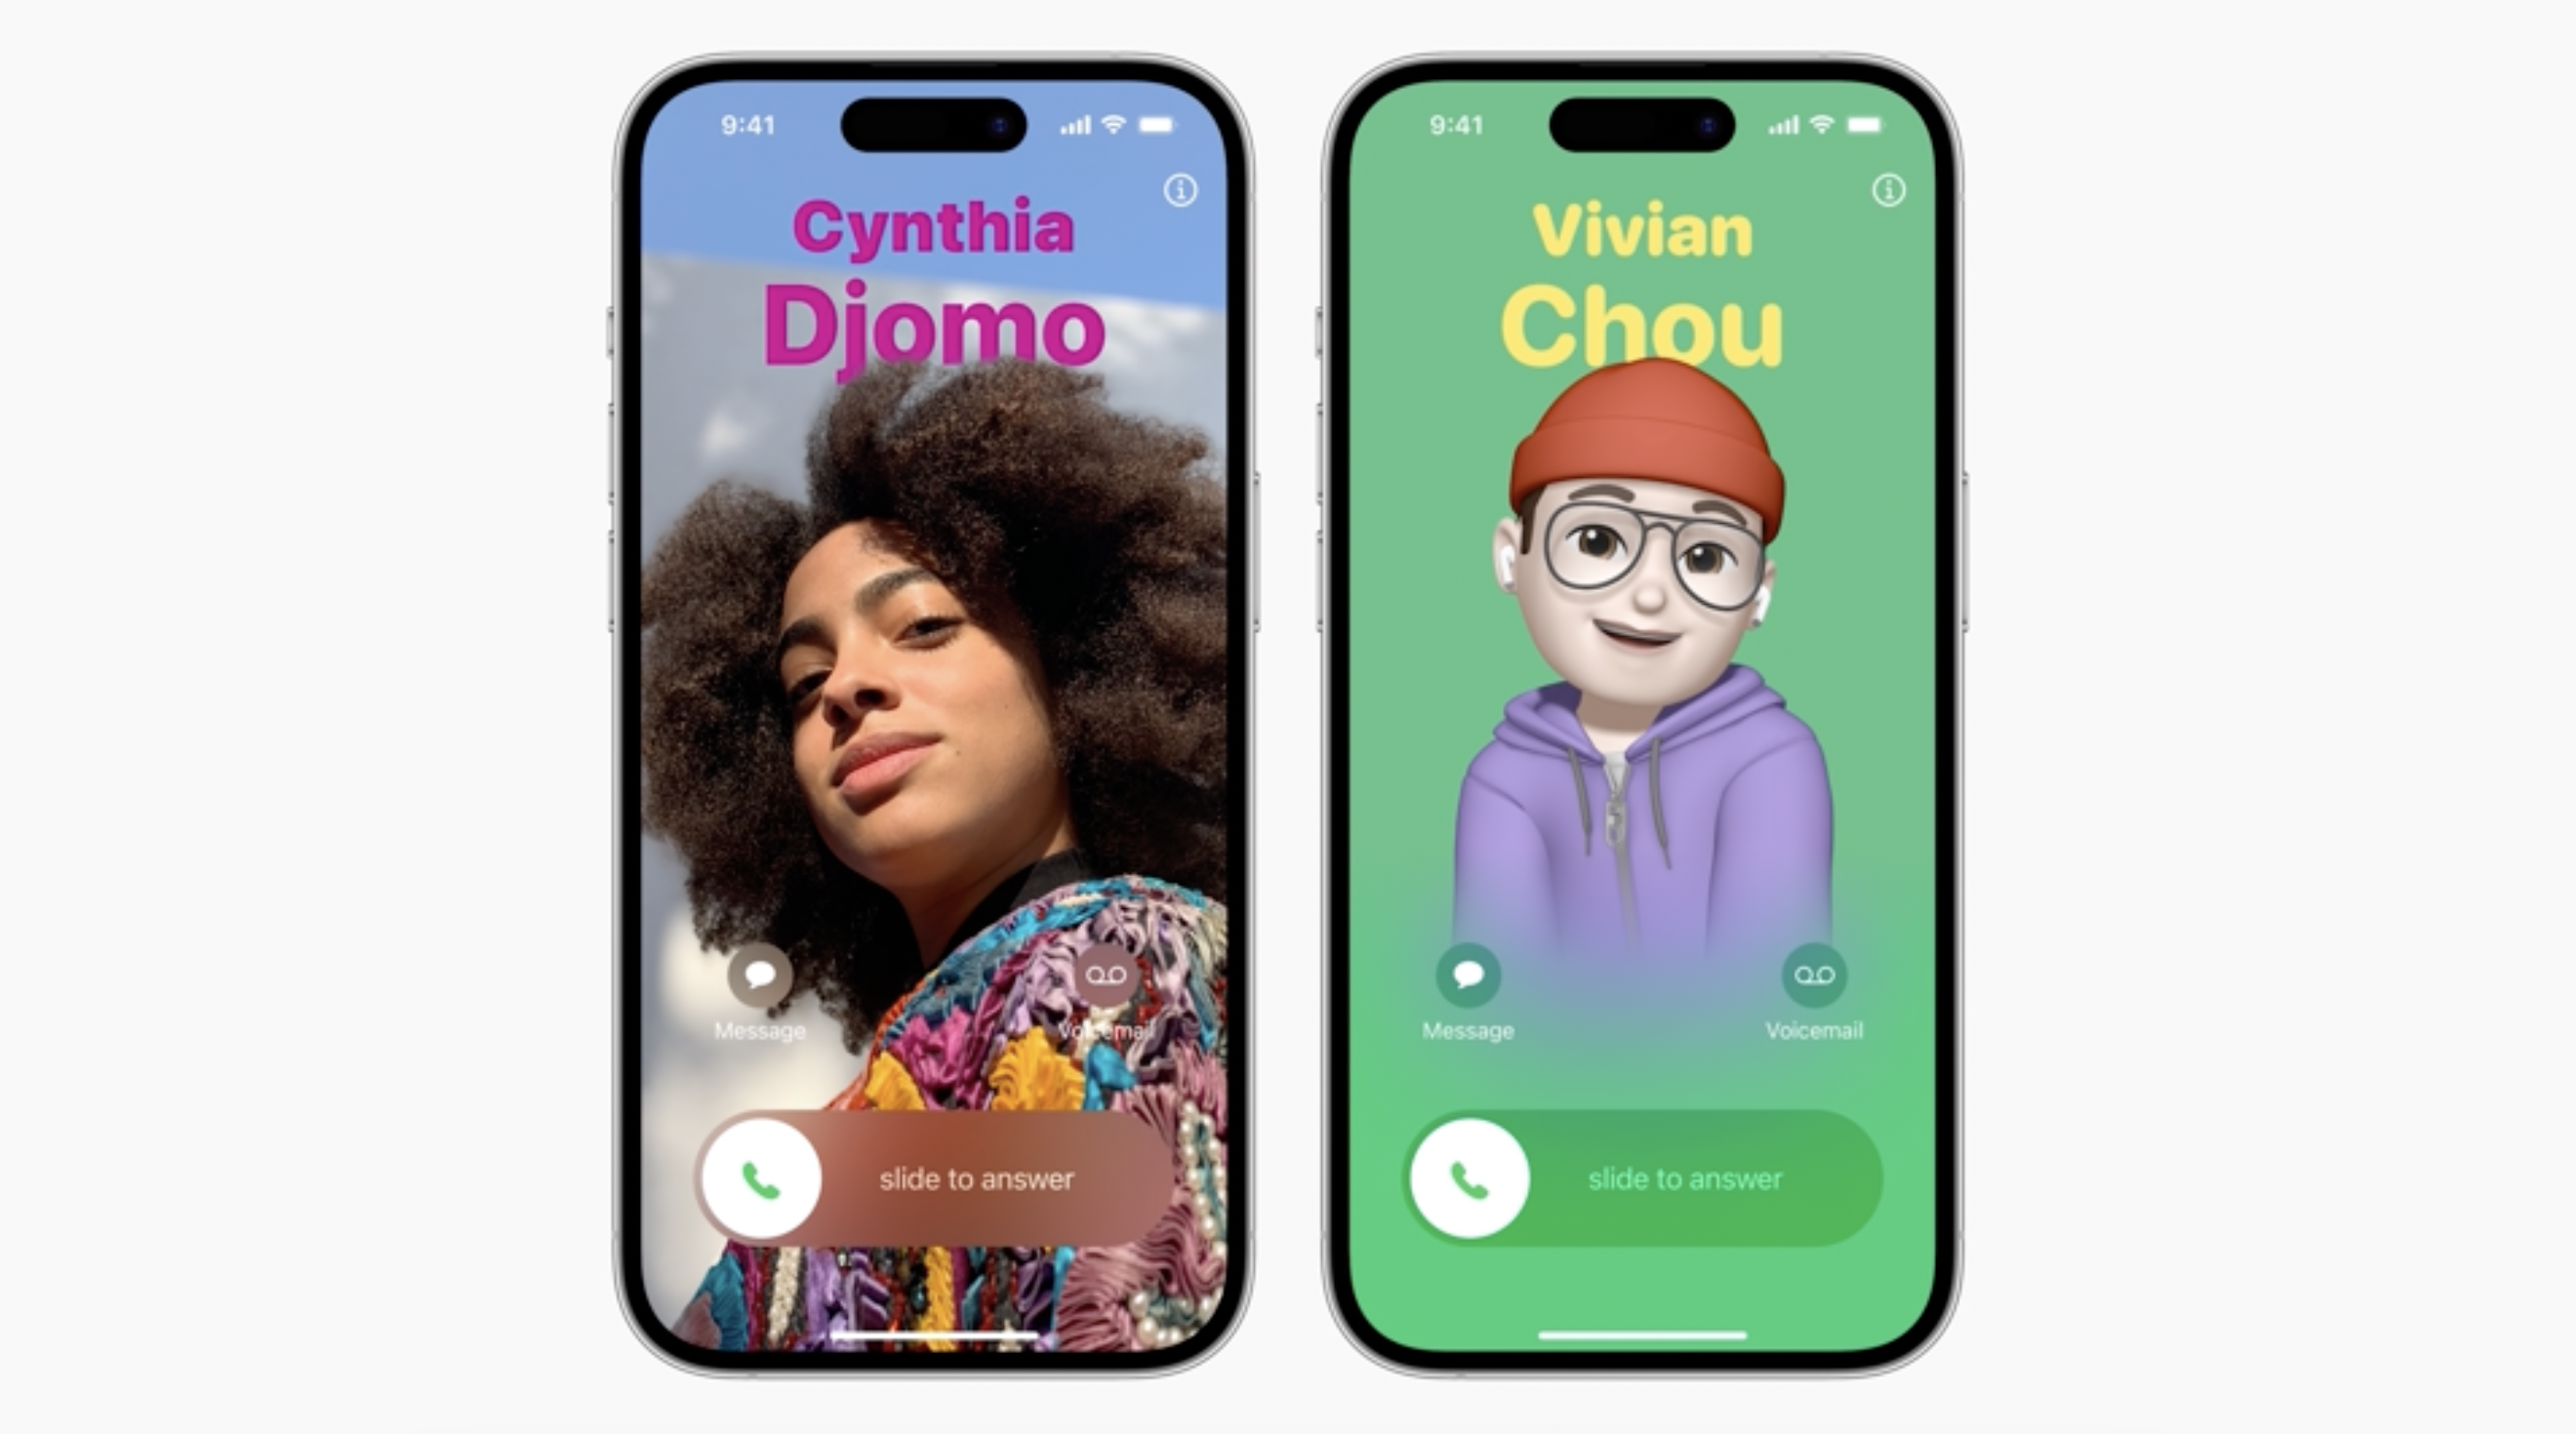 APPLE IOS17 NEW FEATURES: NEW LOOK FOR CALLER ID